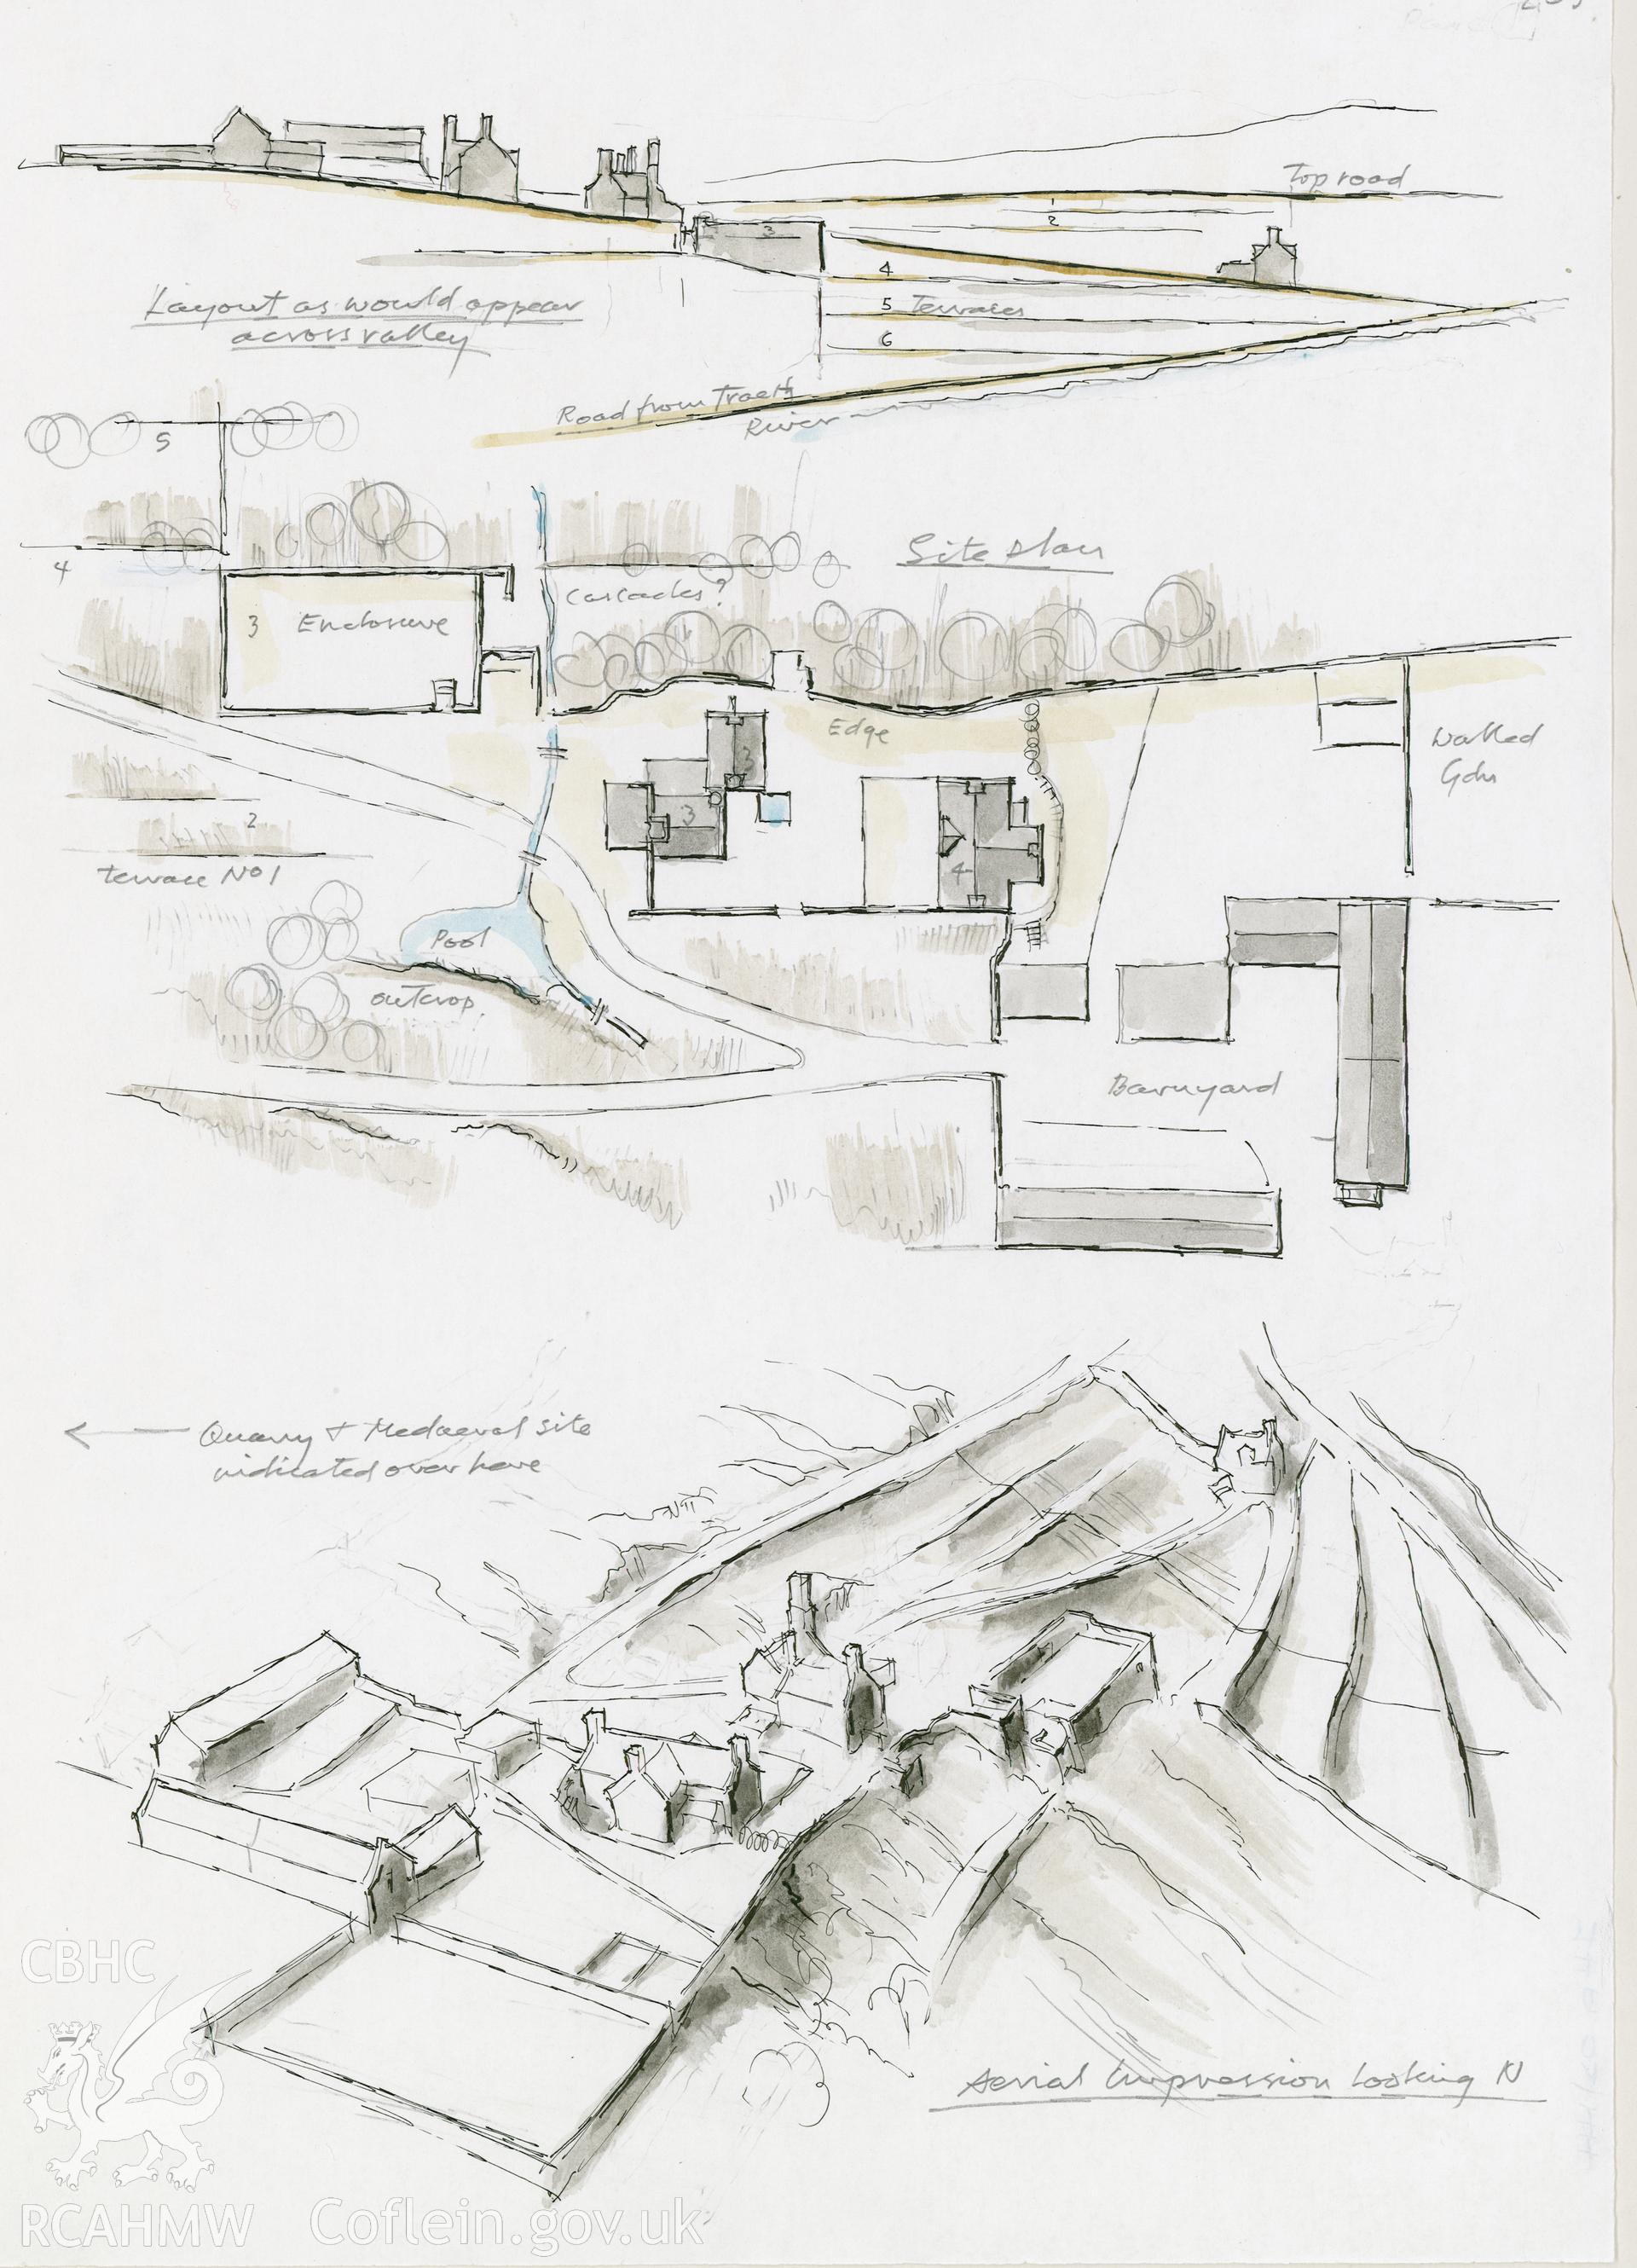 Margaret Dunn Series - Parc: (pencil, ink and watercolour) composite drawing showing diagramatic view from across the valley, plan, and aerial view.